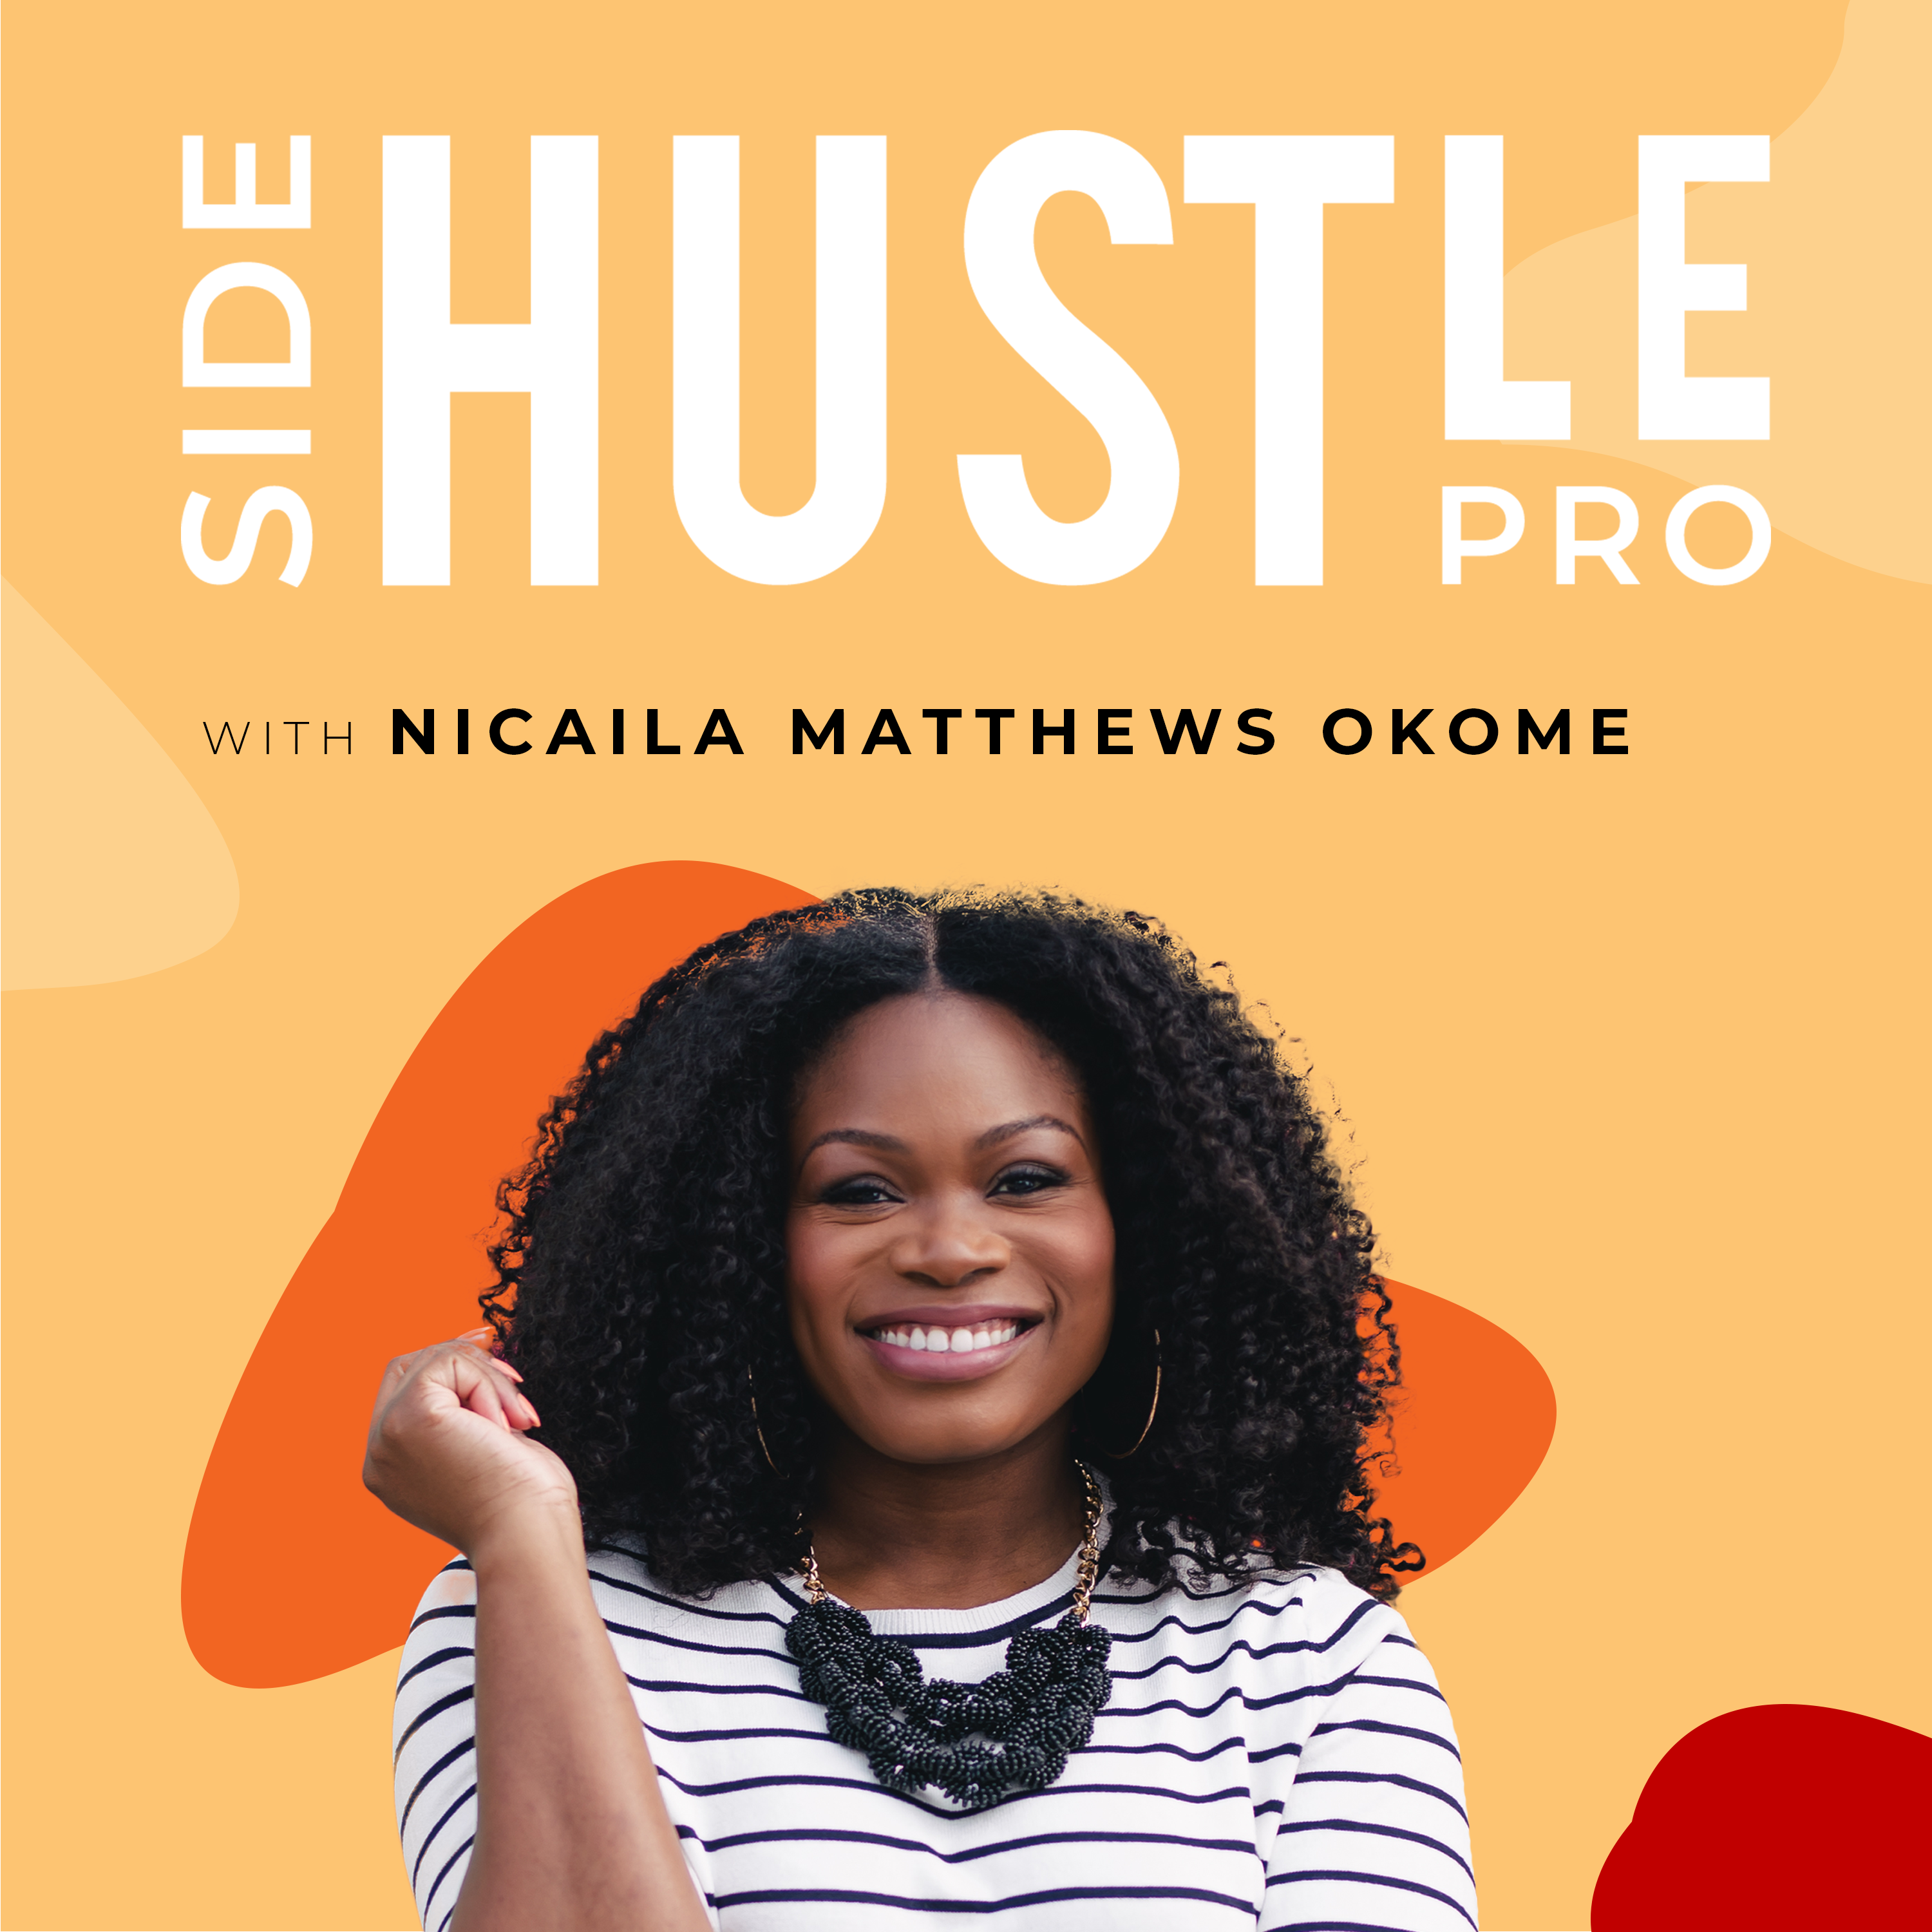 313: How Ericka Chambers is Building Her Brand, Puzzles of Color, While Working Full Time REWIND